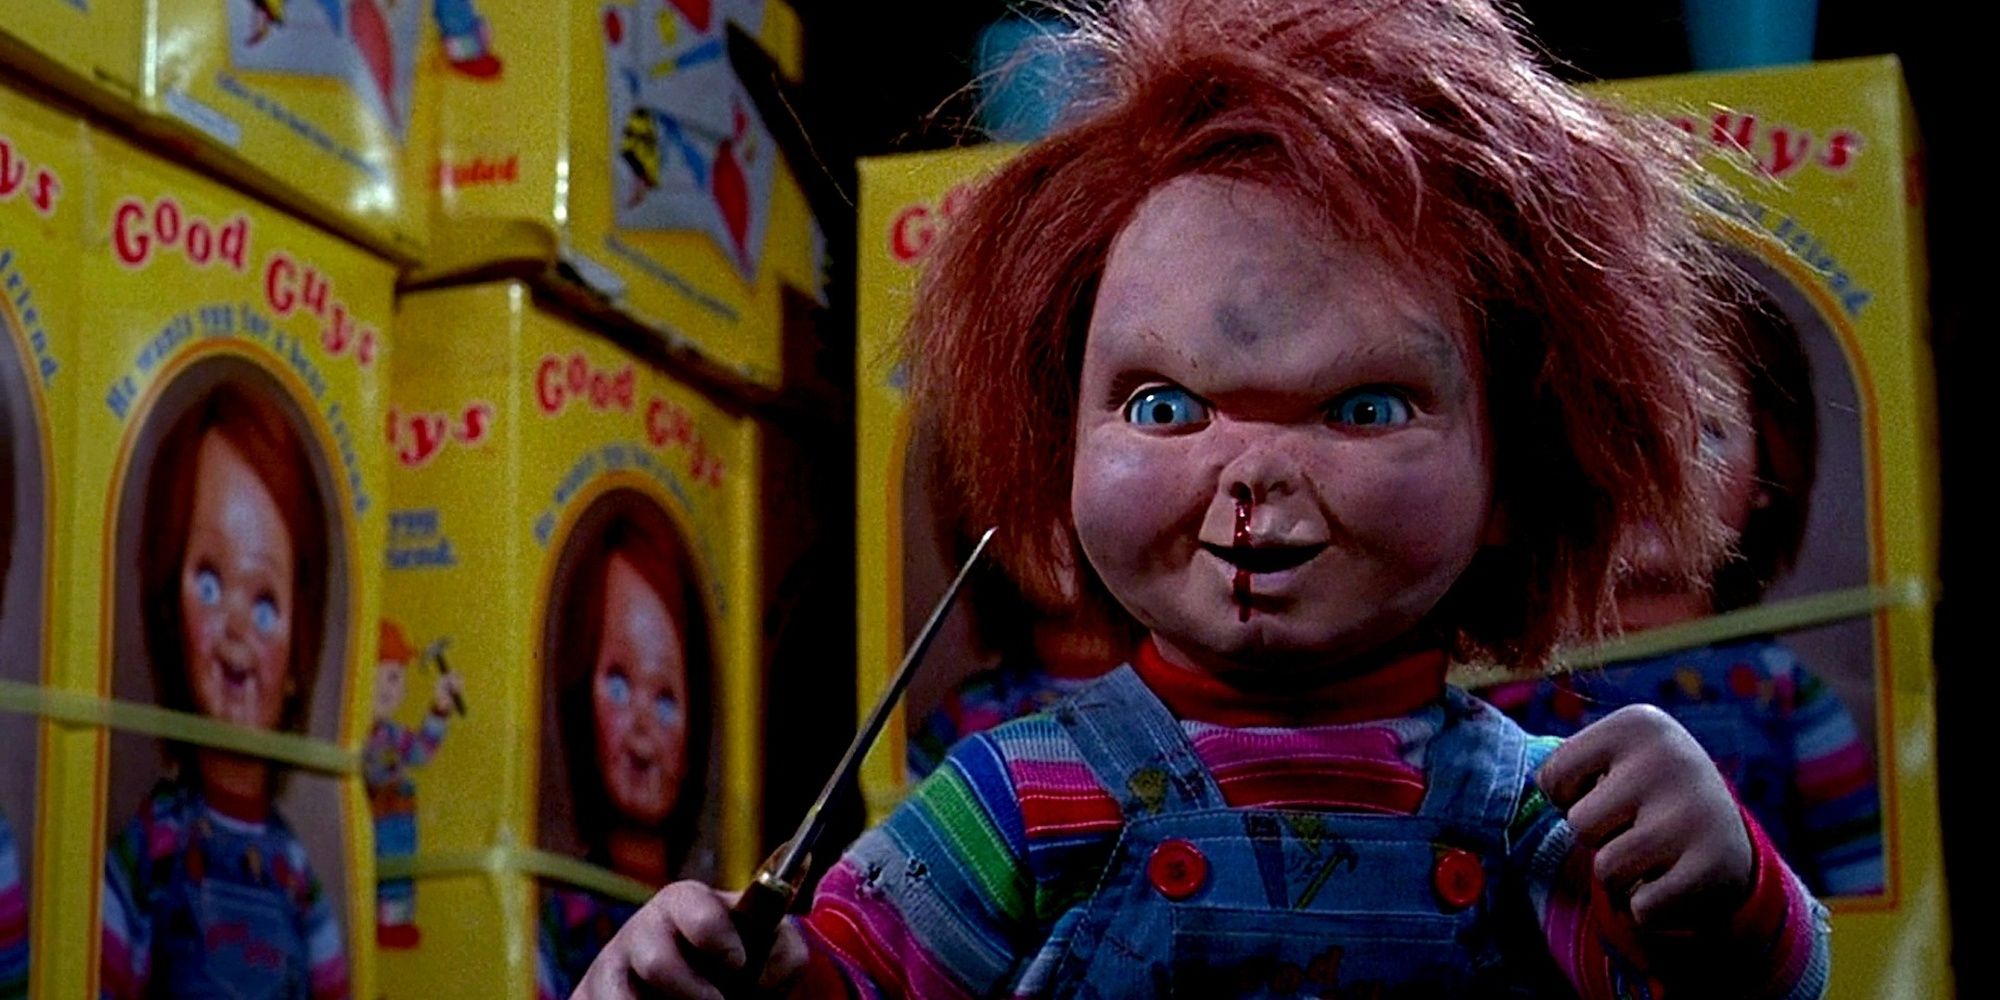 Chucky swings a knife in Child's Play 2